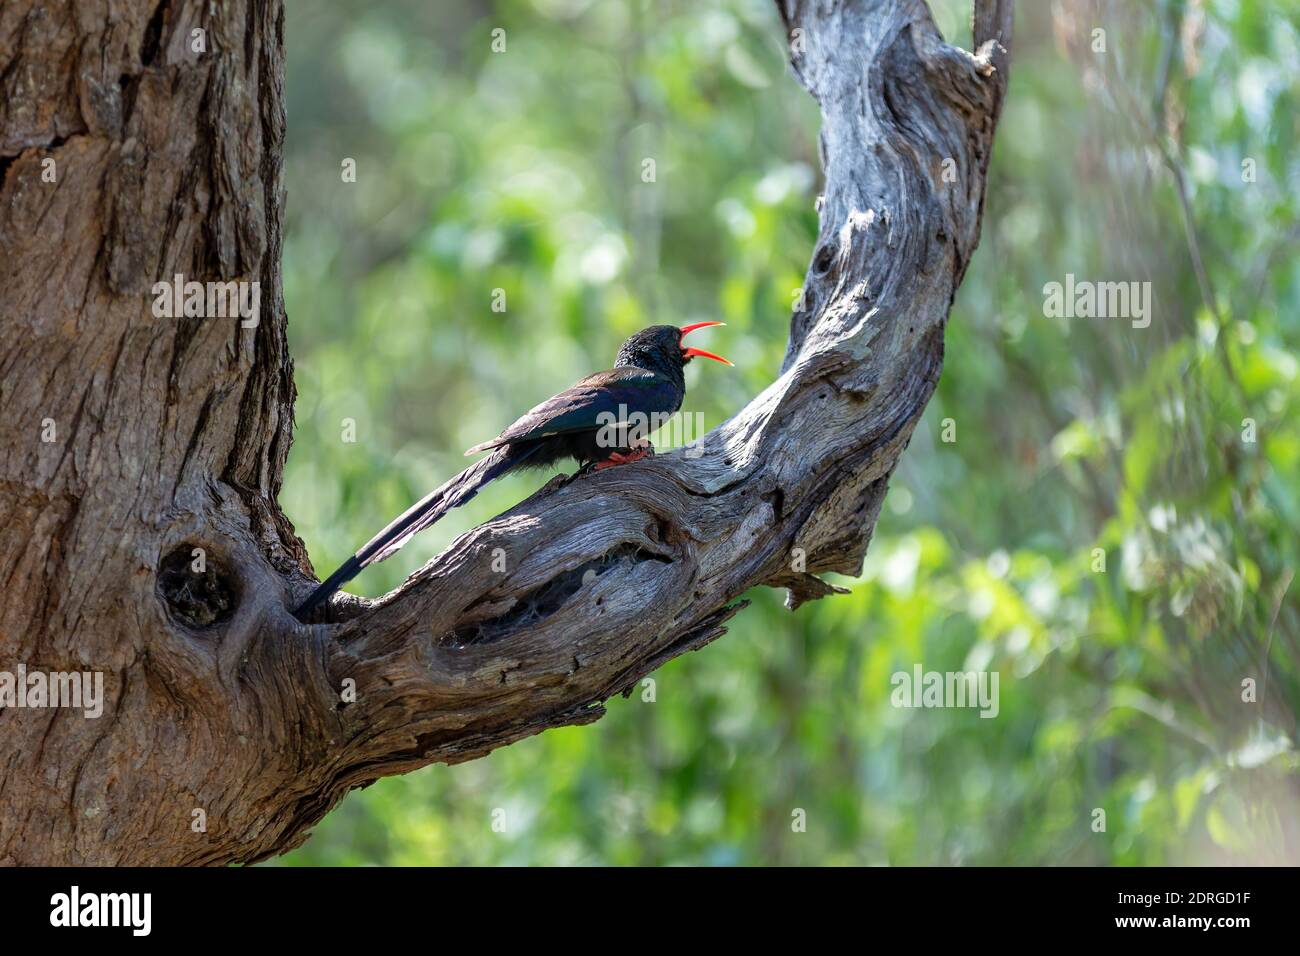 Green Wood hoopoe, Phoeniculus purpureus also known as redbilled hoopoe makes cackling sound and are in black in color with green patches. Bwabwata Na Stock Photo